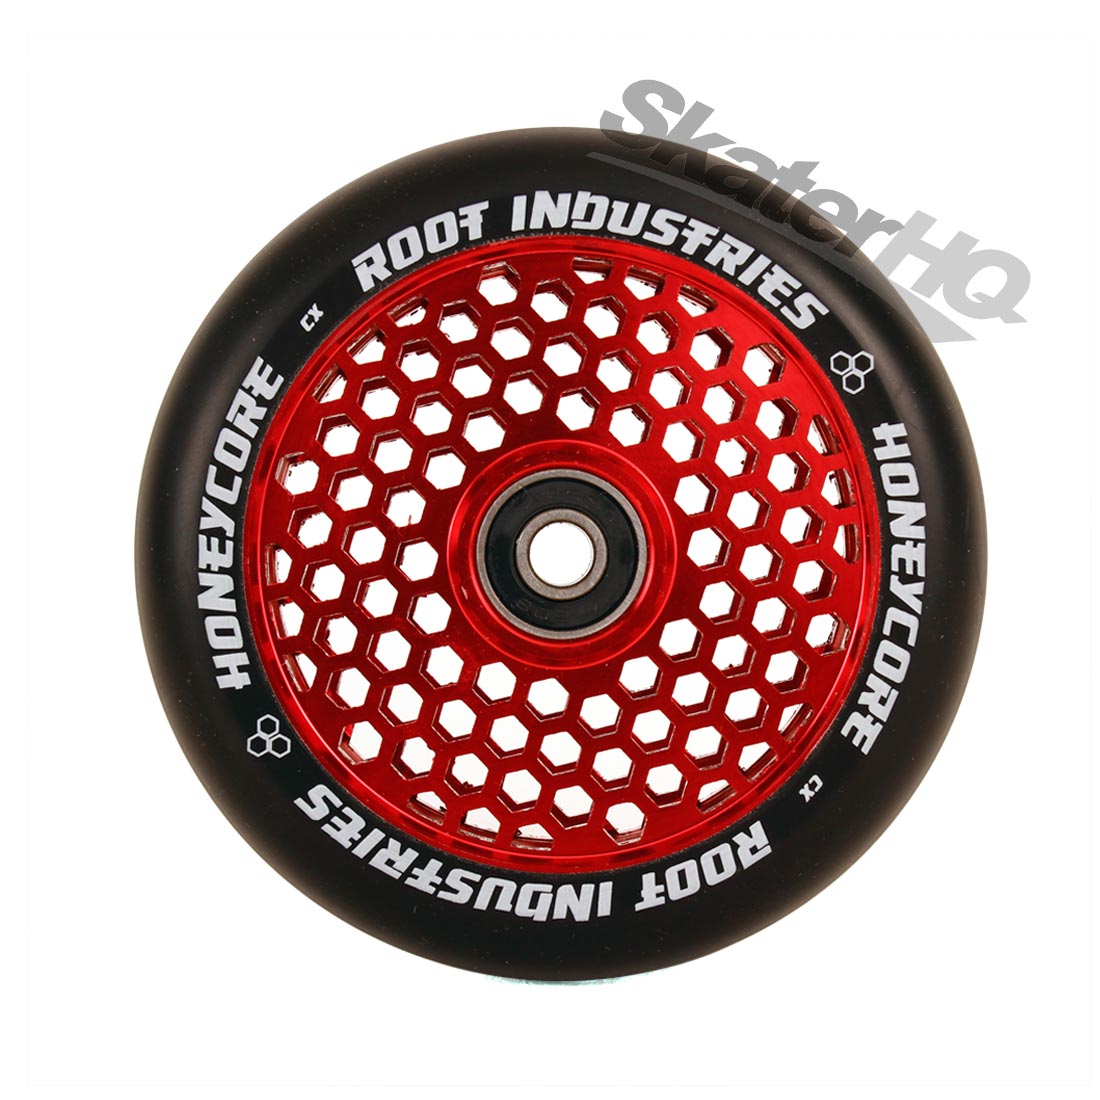 Root Industries Honey Core 110mm - Black/Red Scooter Wheels